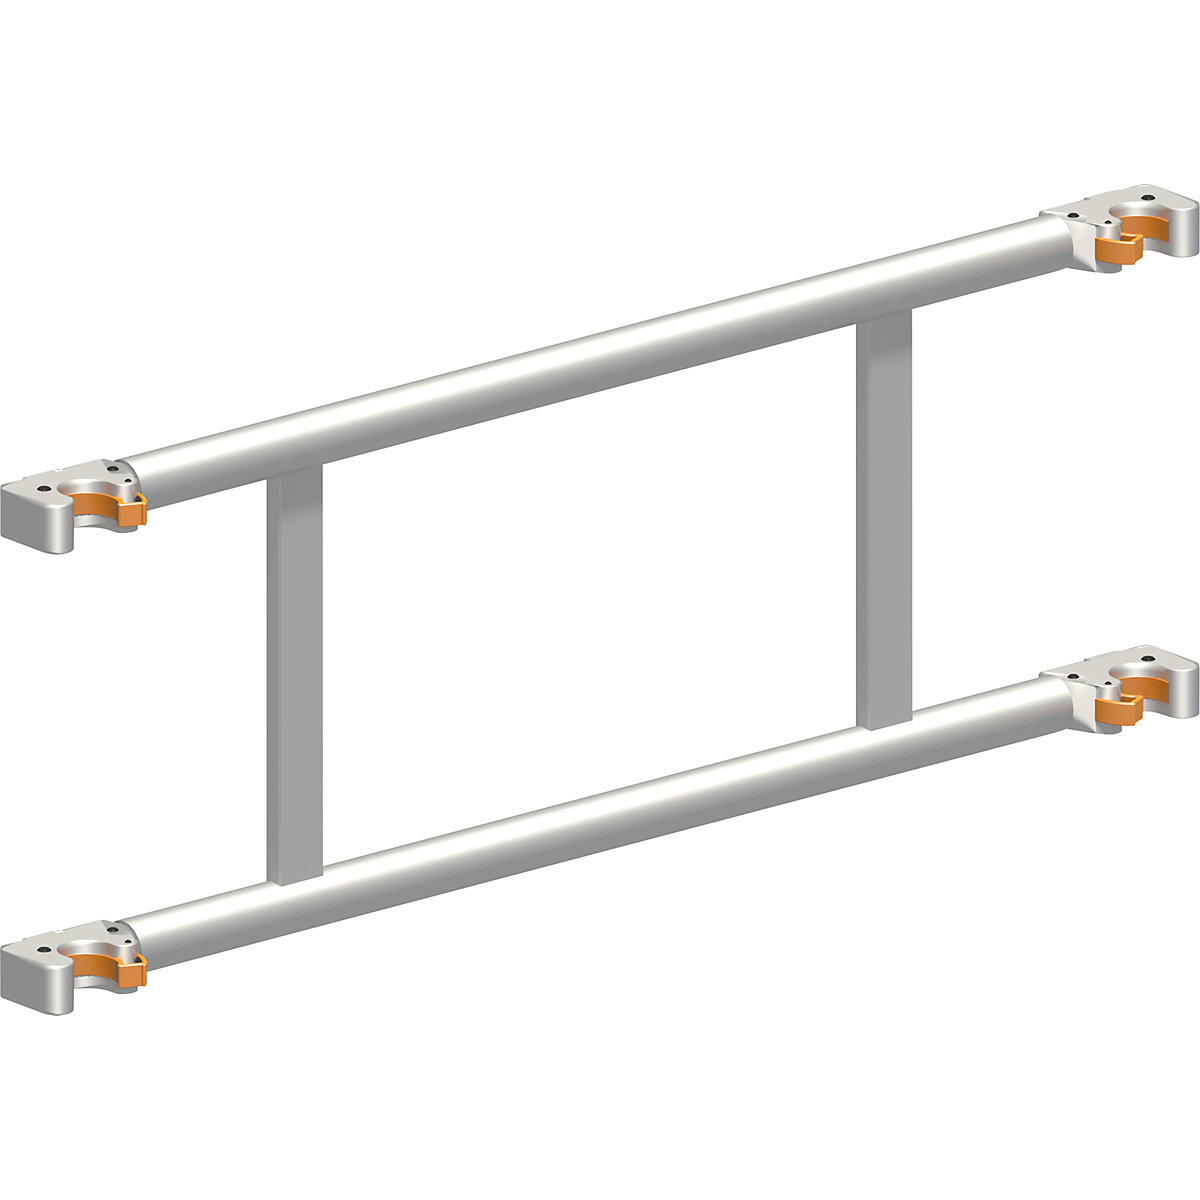 Double railing – Layher